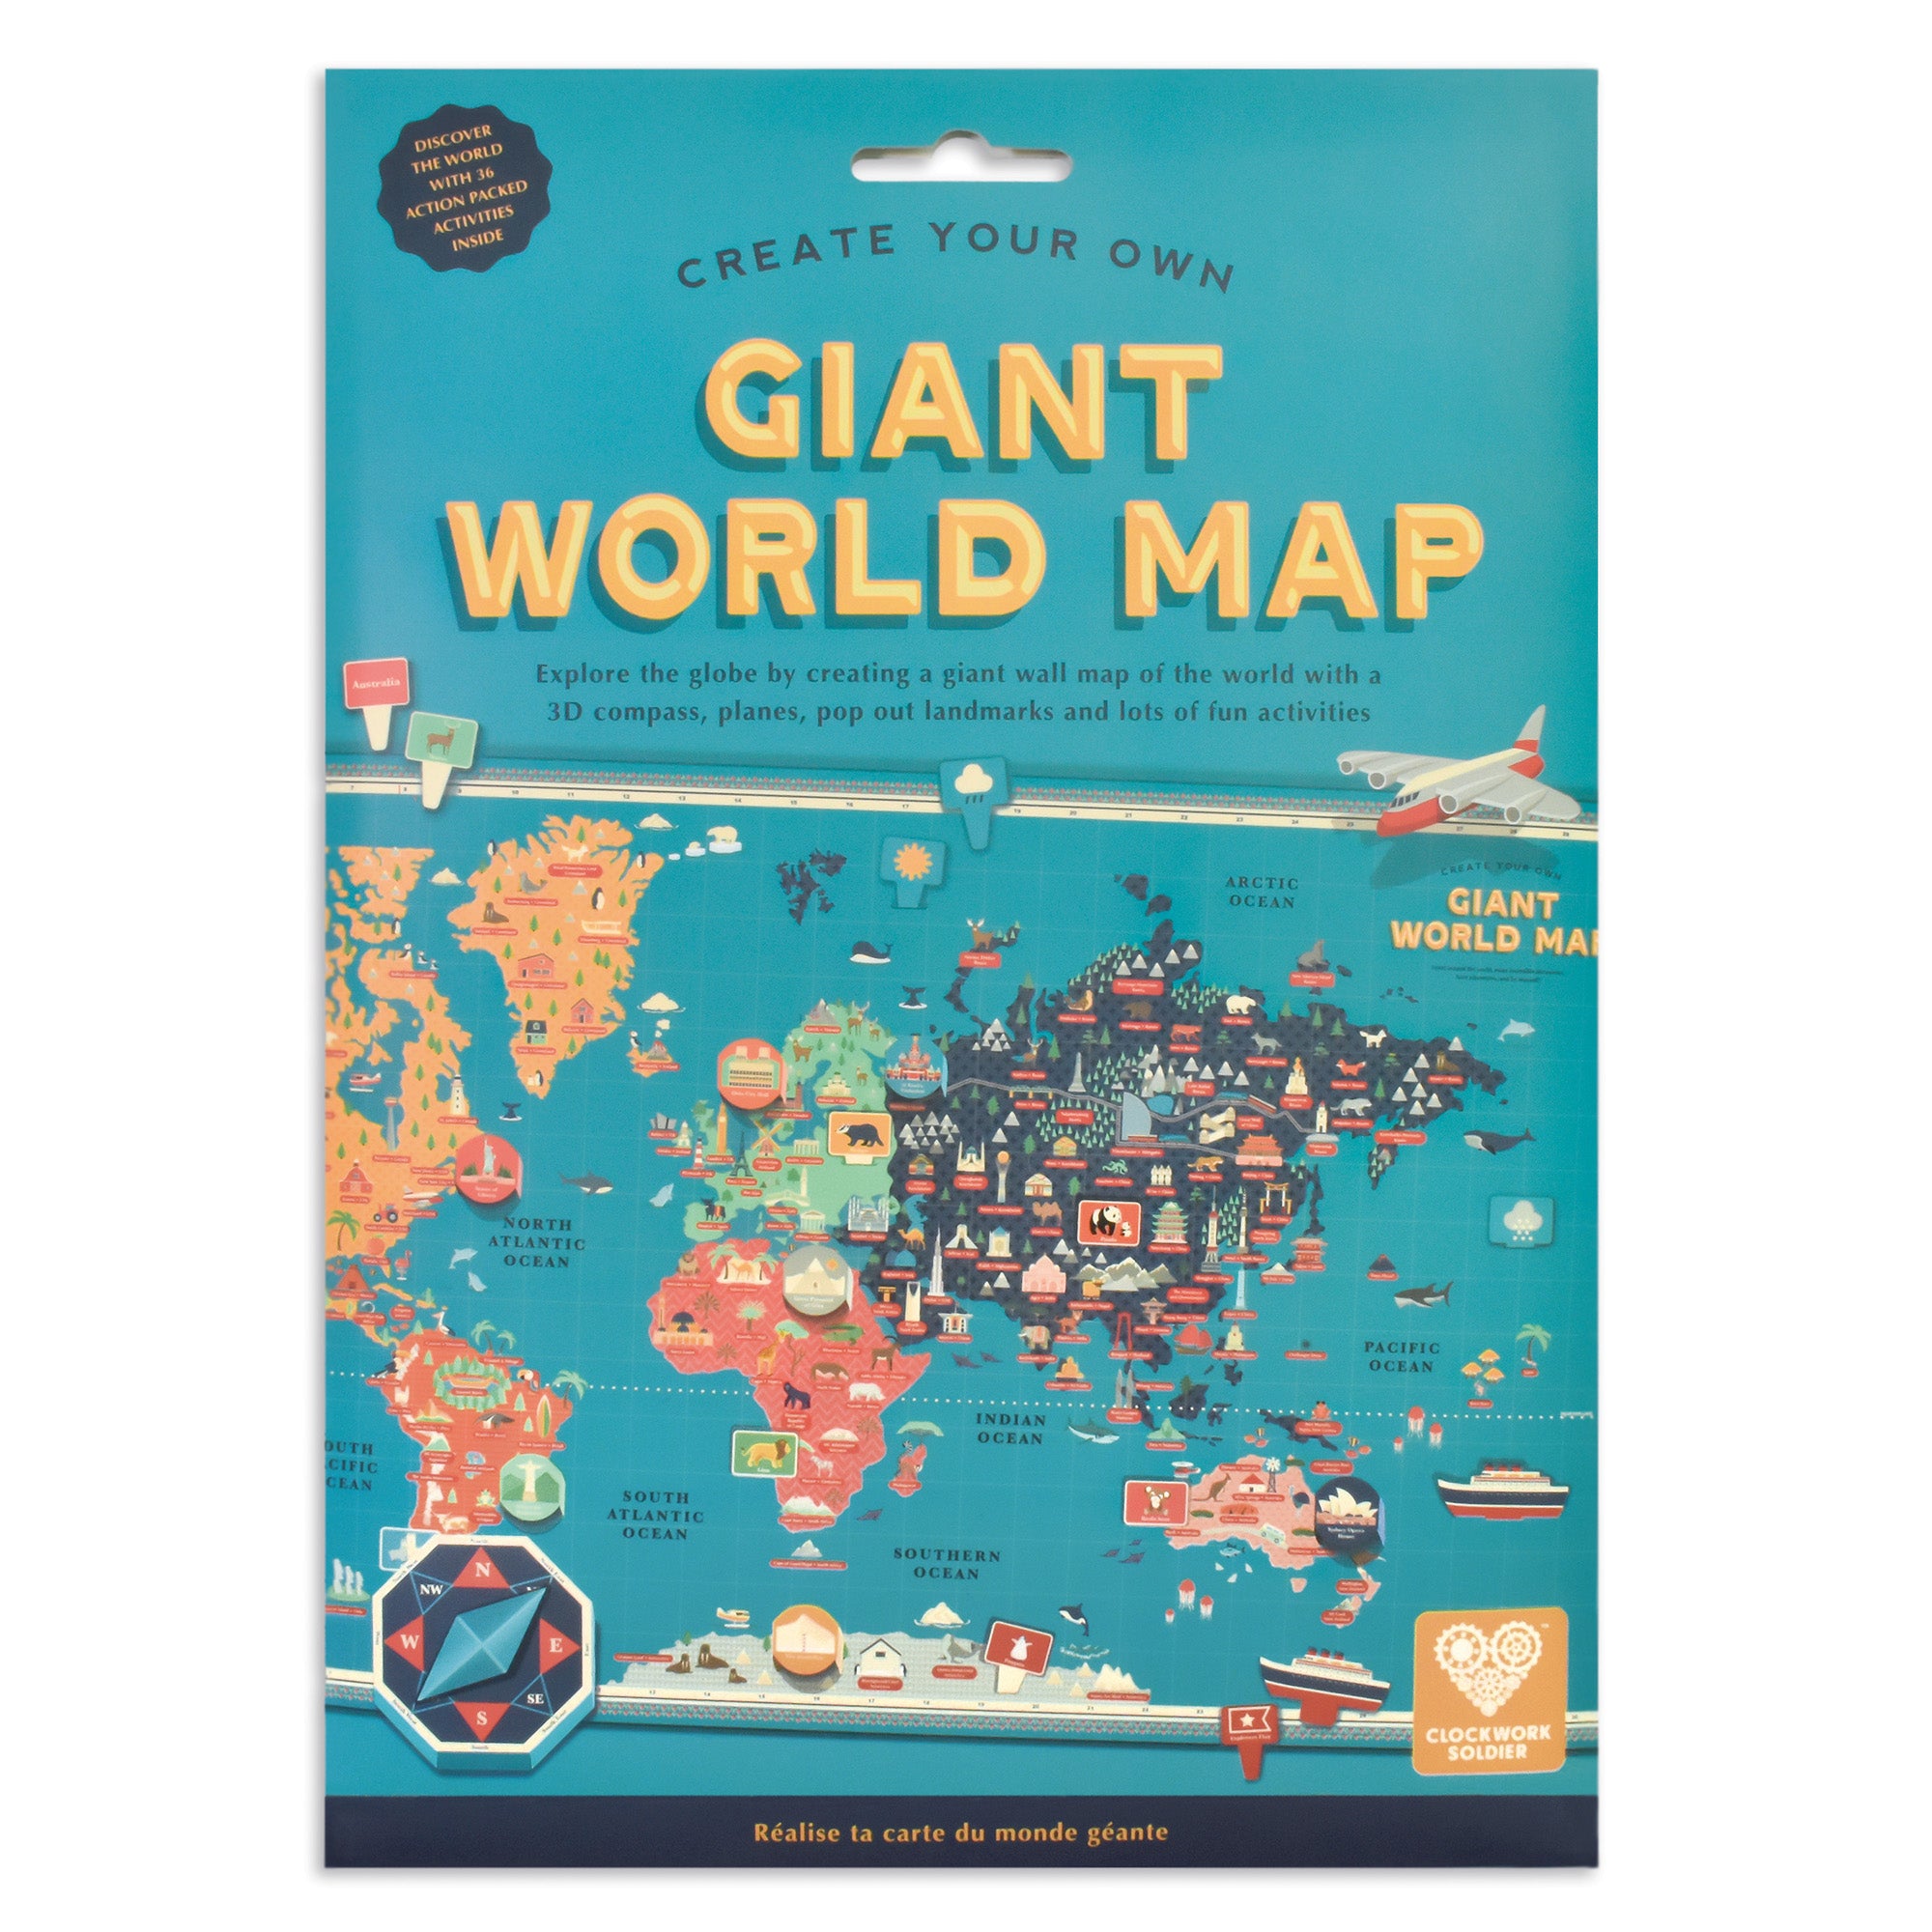 Create your own Giant World Map